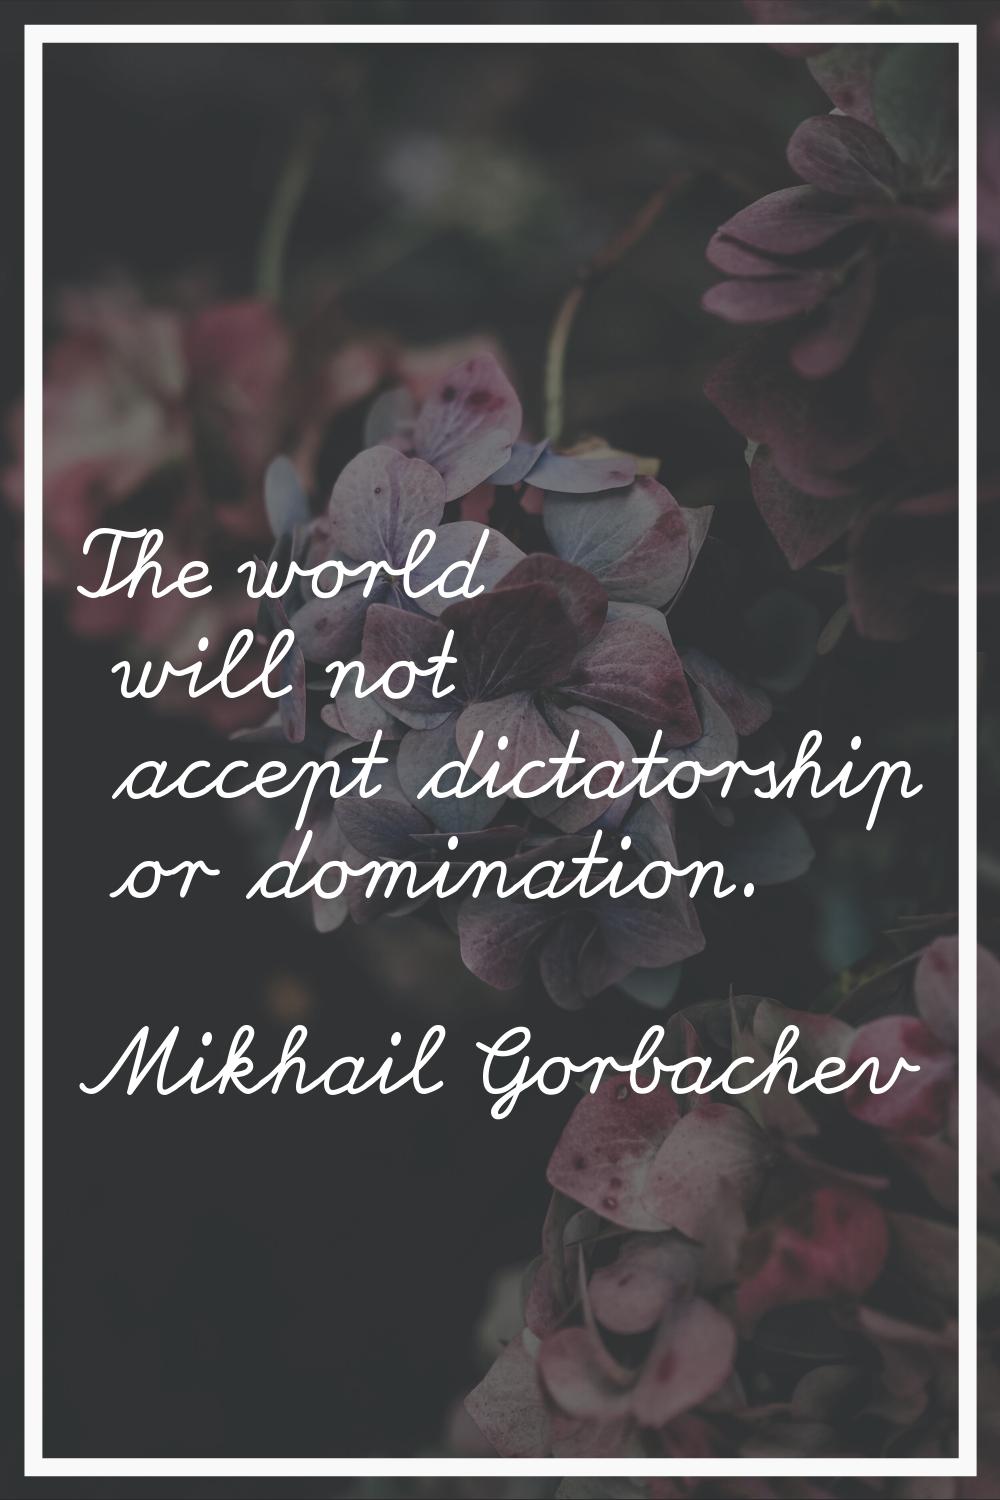 The world will not accept dictatorship or domination.